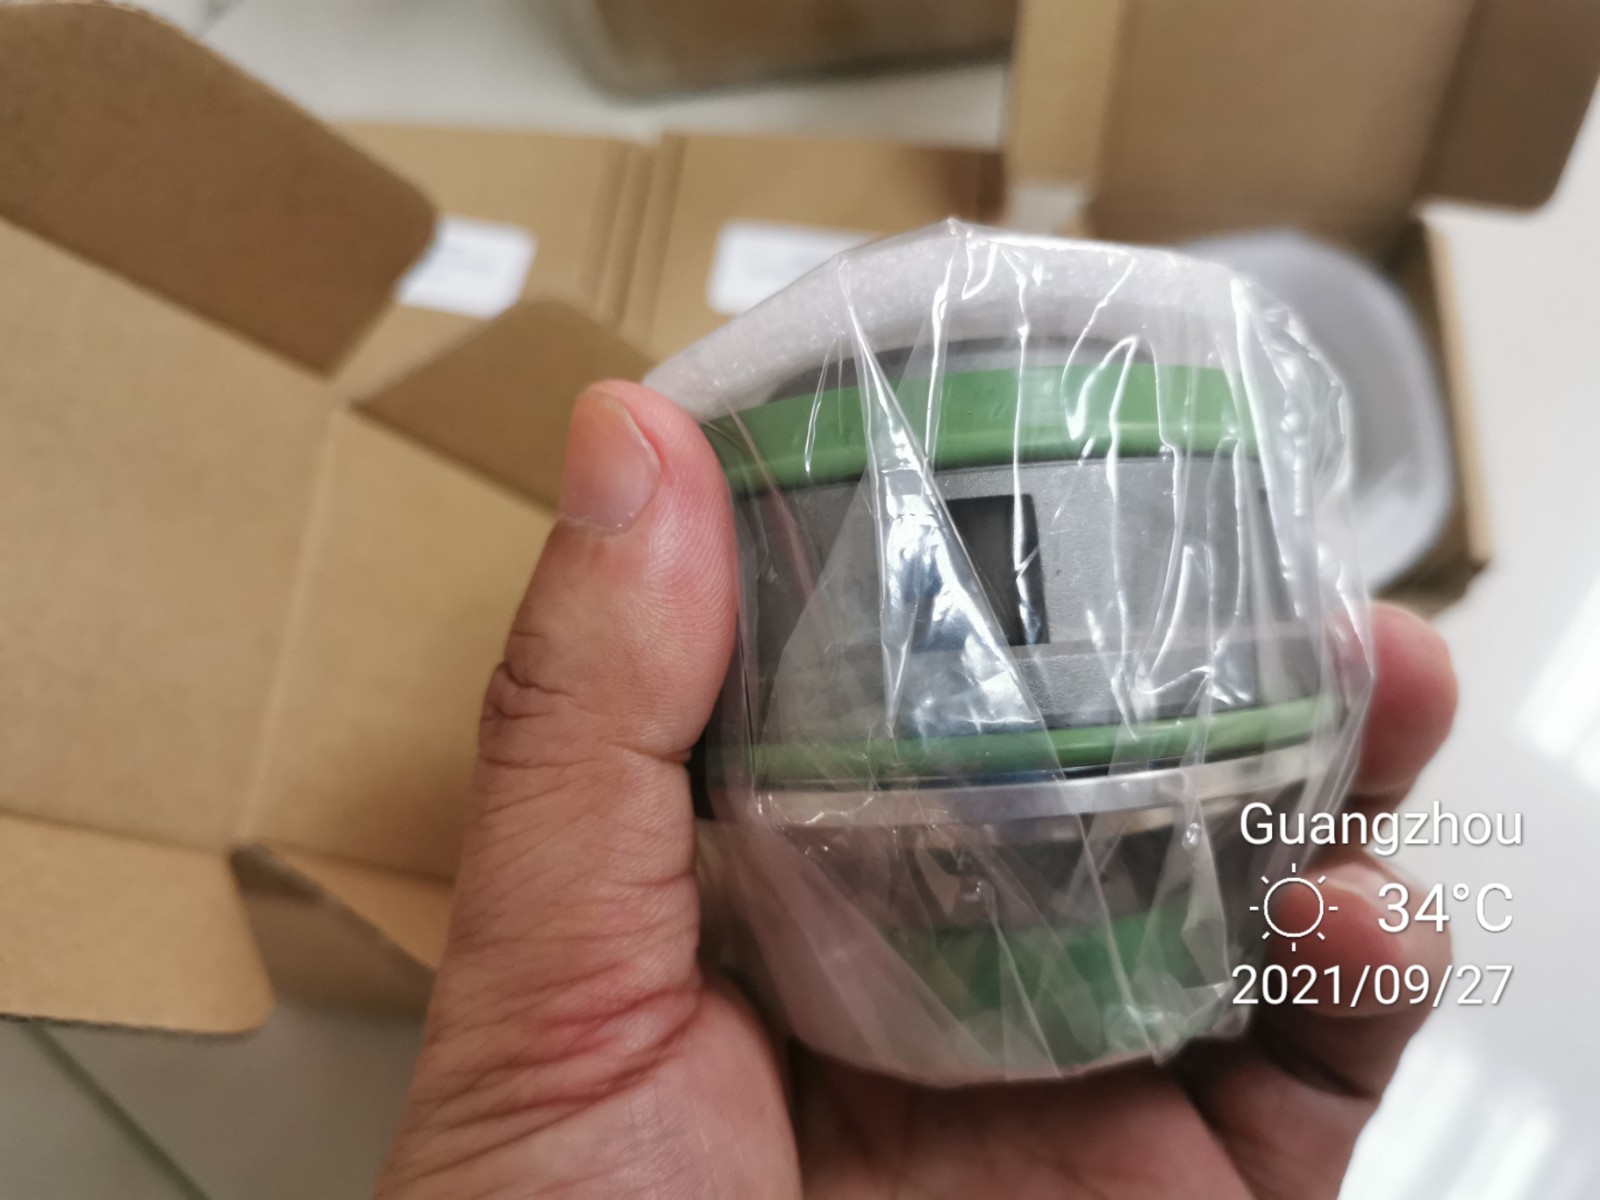 news-5pcs flygt cartridge seal for xylem flygt pump ready to deliver-Lepu-img